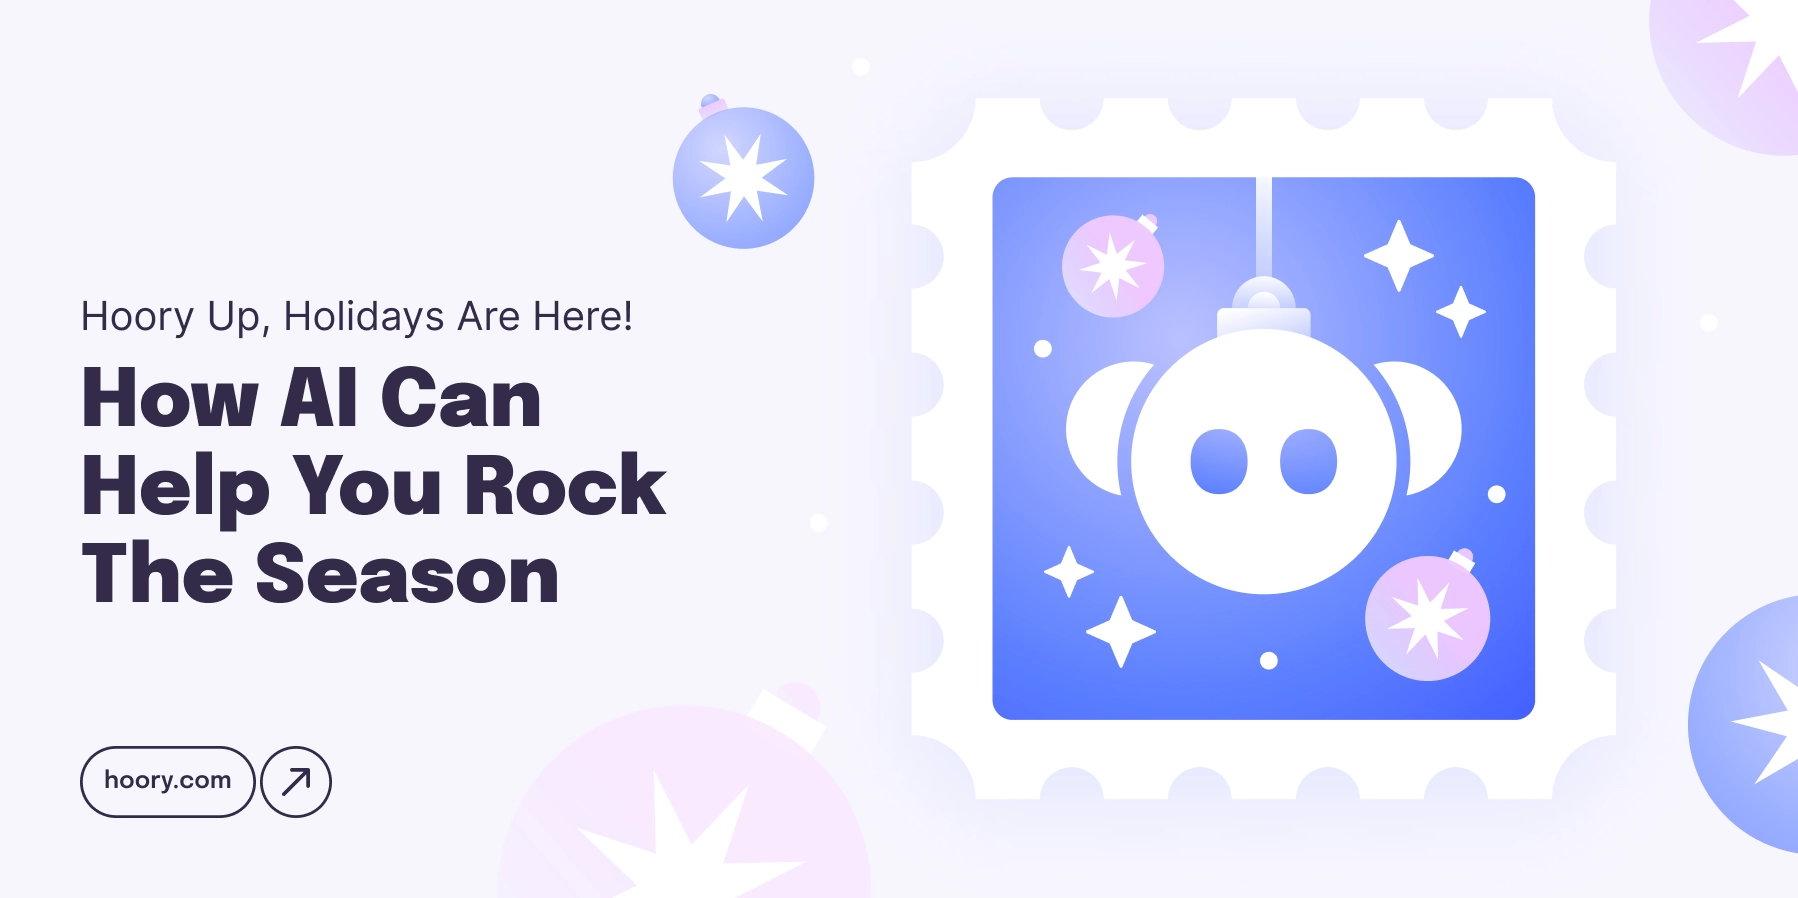 Hoory Up, Holidays Are Here! How AI Can Help You Rock the Season